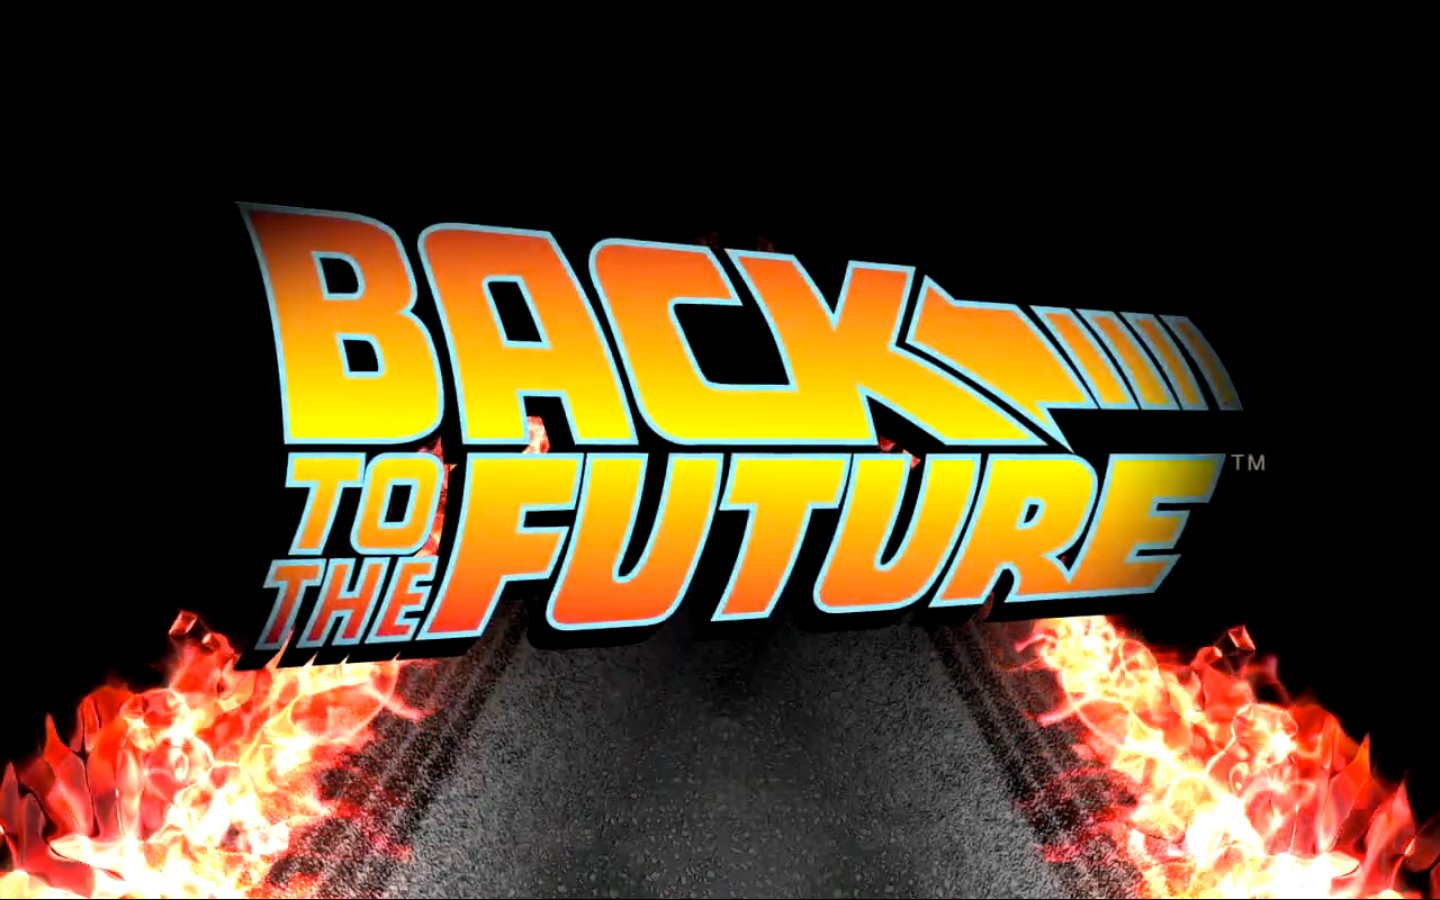 Back To The Future Wallpaper 1920x1080 Free Download Wallpaper